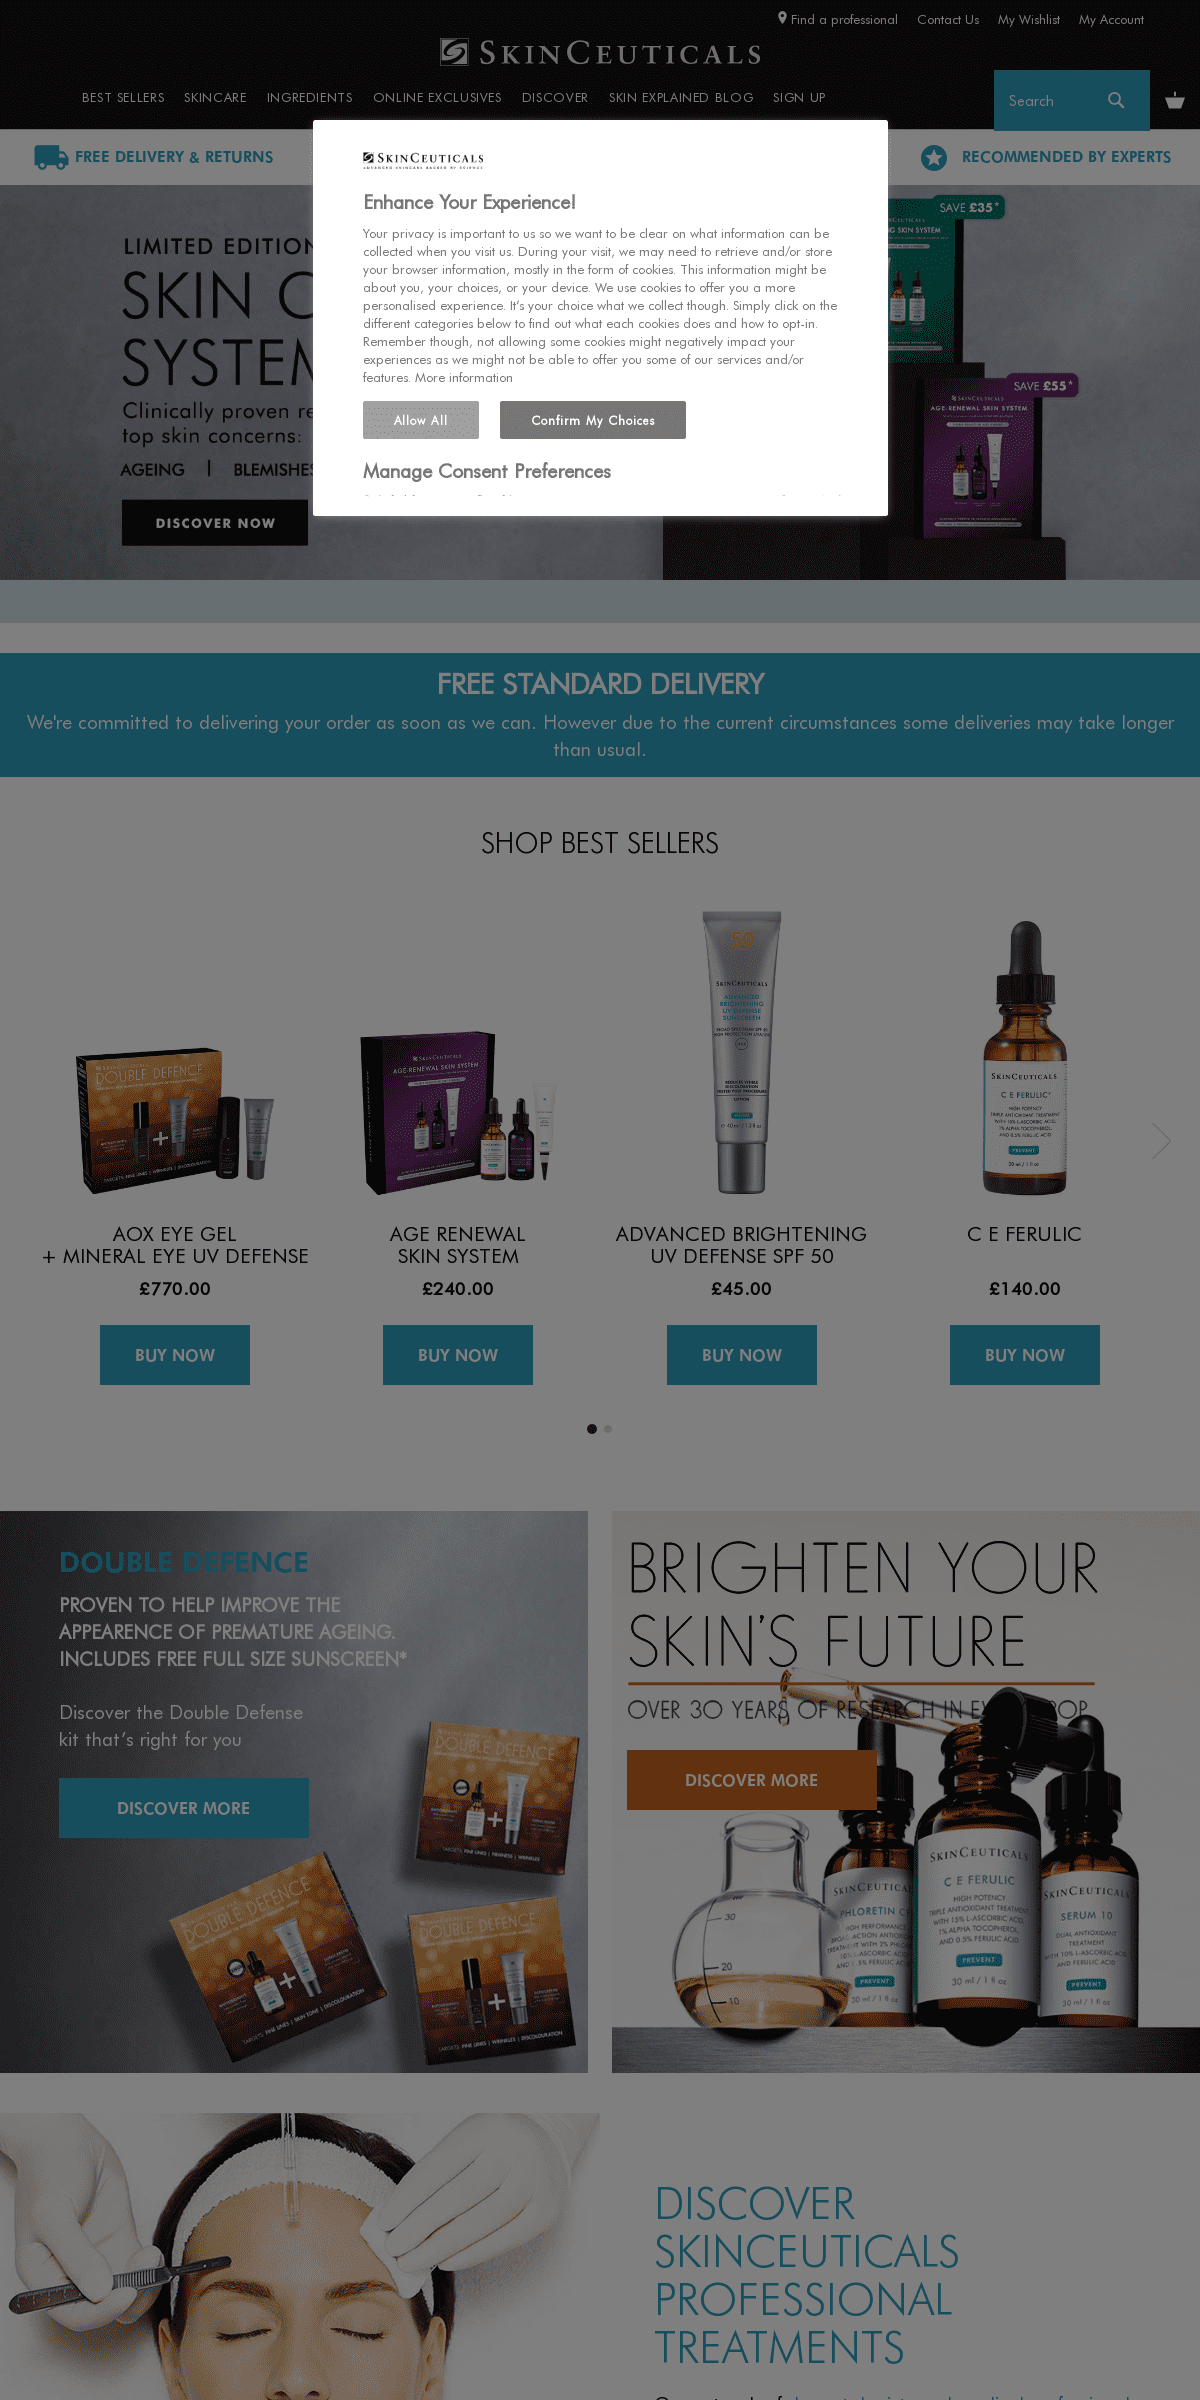 A complete backup of skinceuticals.co.uk